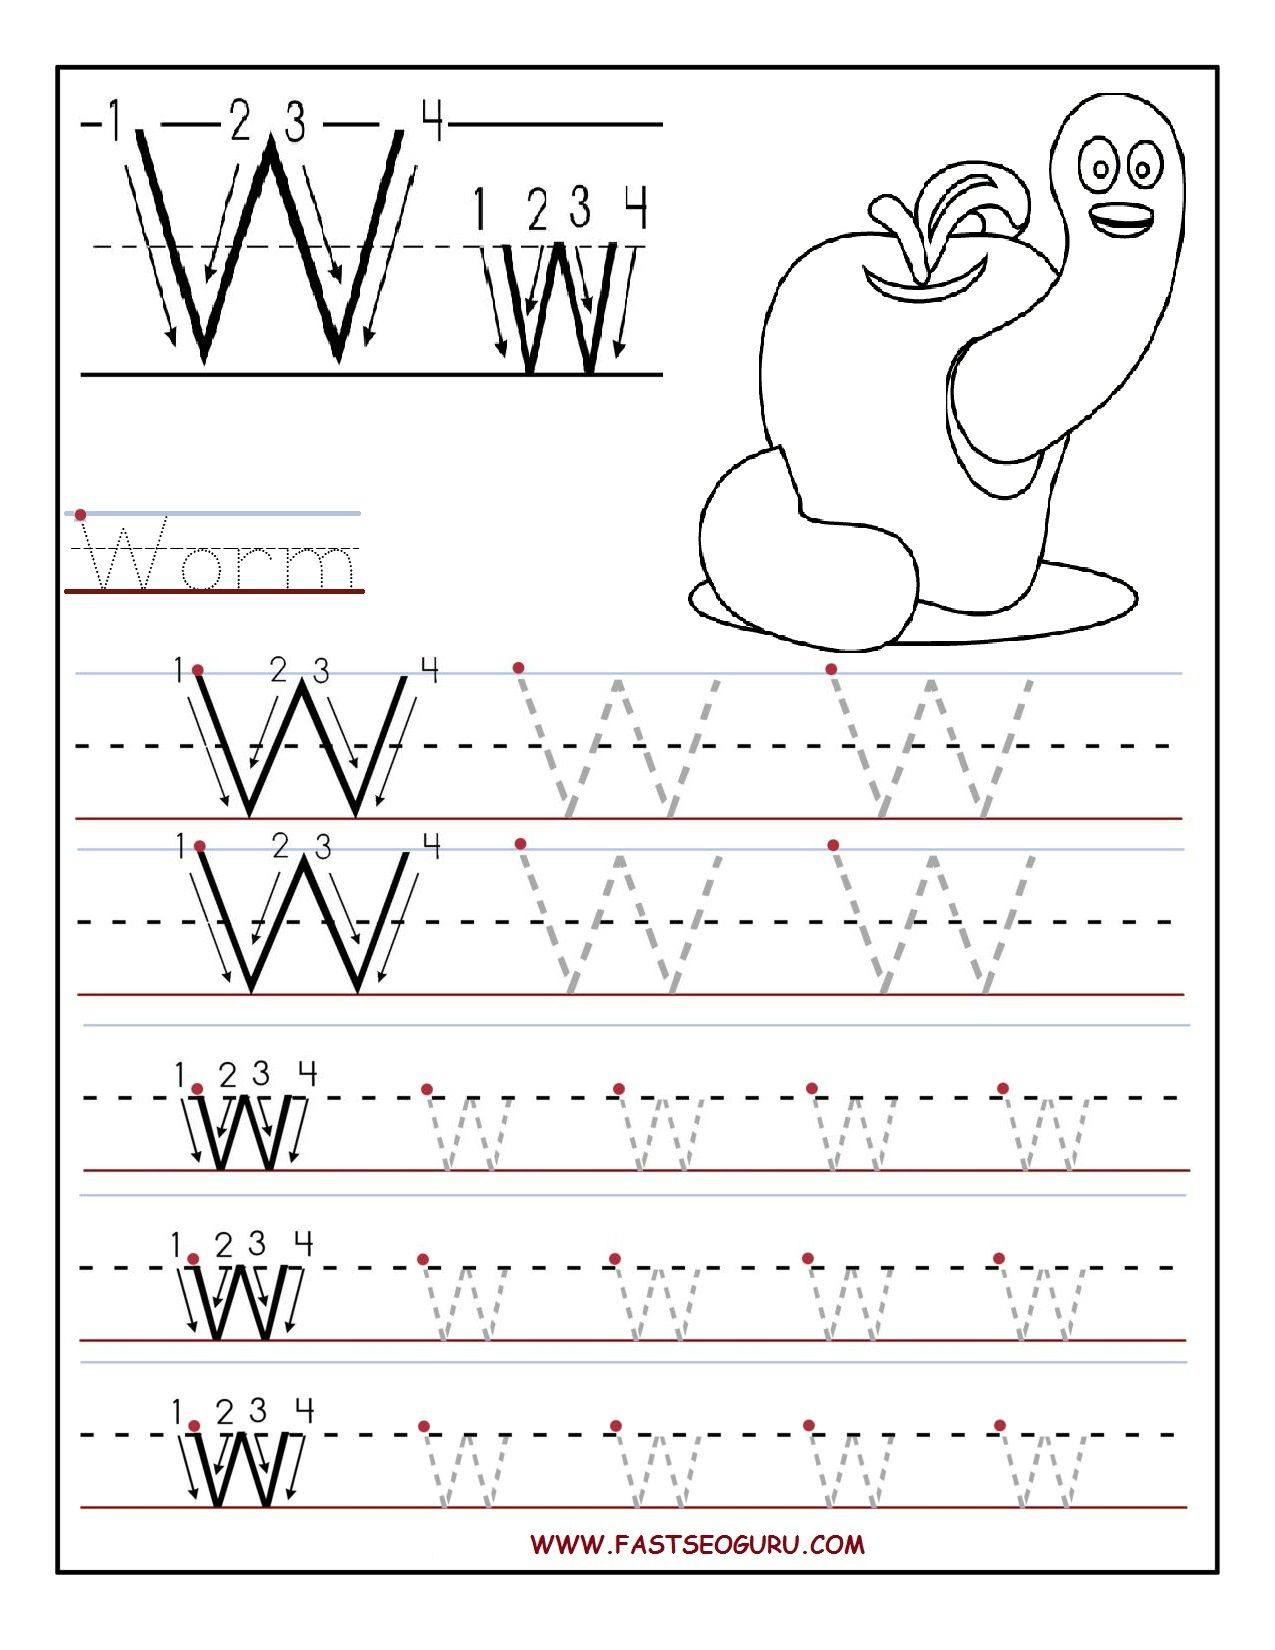 Printable Letter W Tracing Worksheets For Preschool throughout Letter W Tracing Preschool